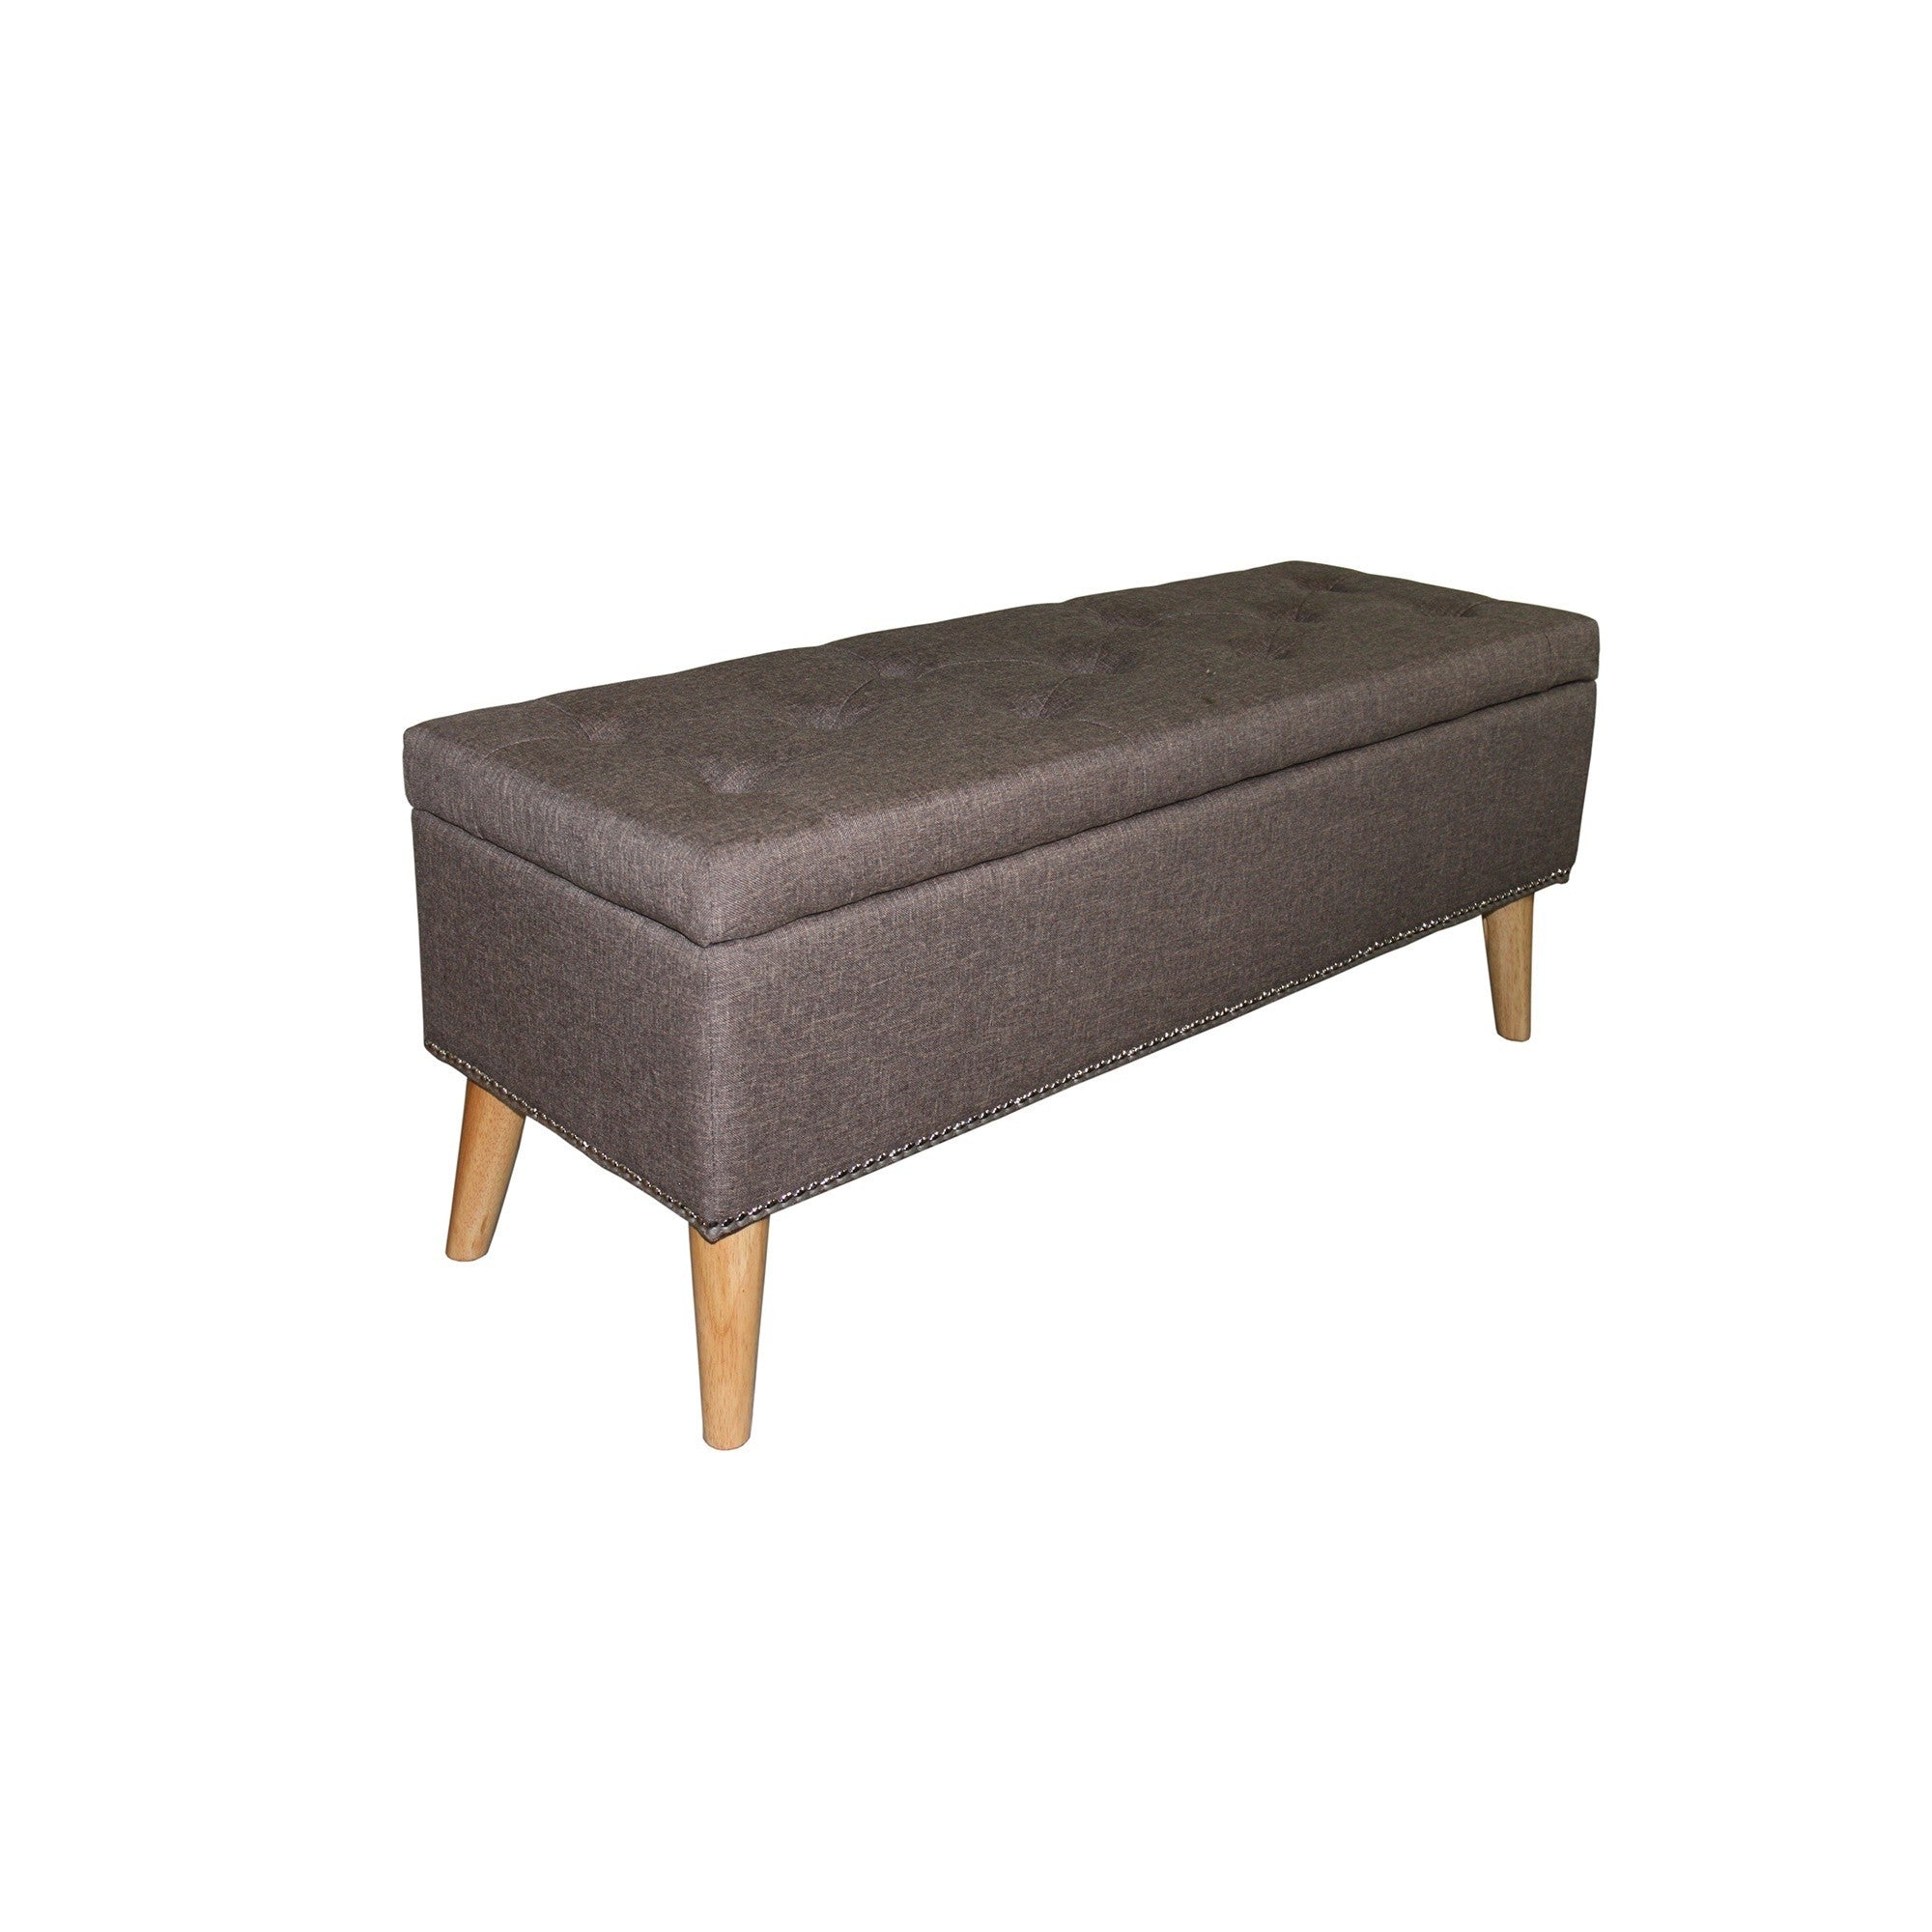 Gray Brown Linen Look Tufted Storage Bench